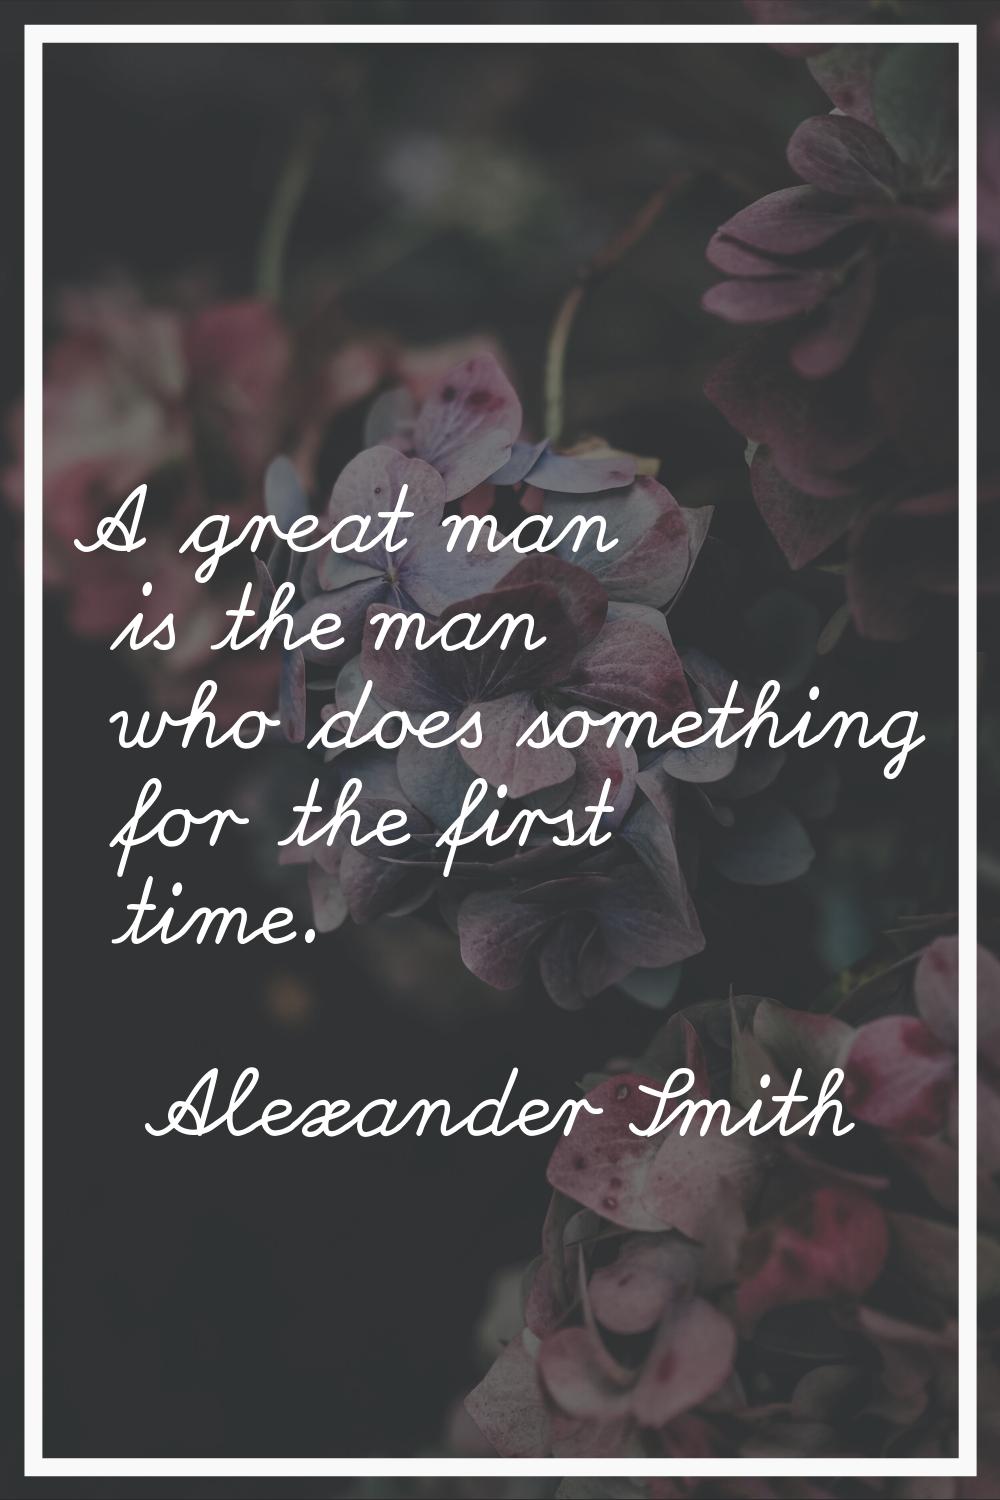 A great man is the man who does something for the first time.